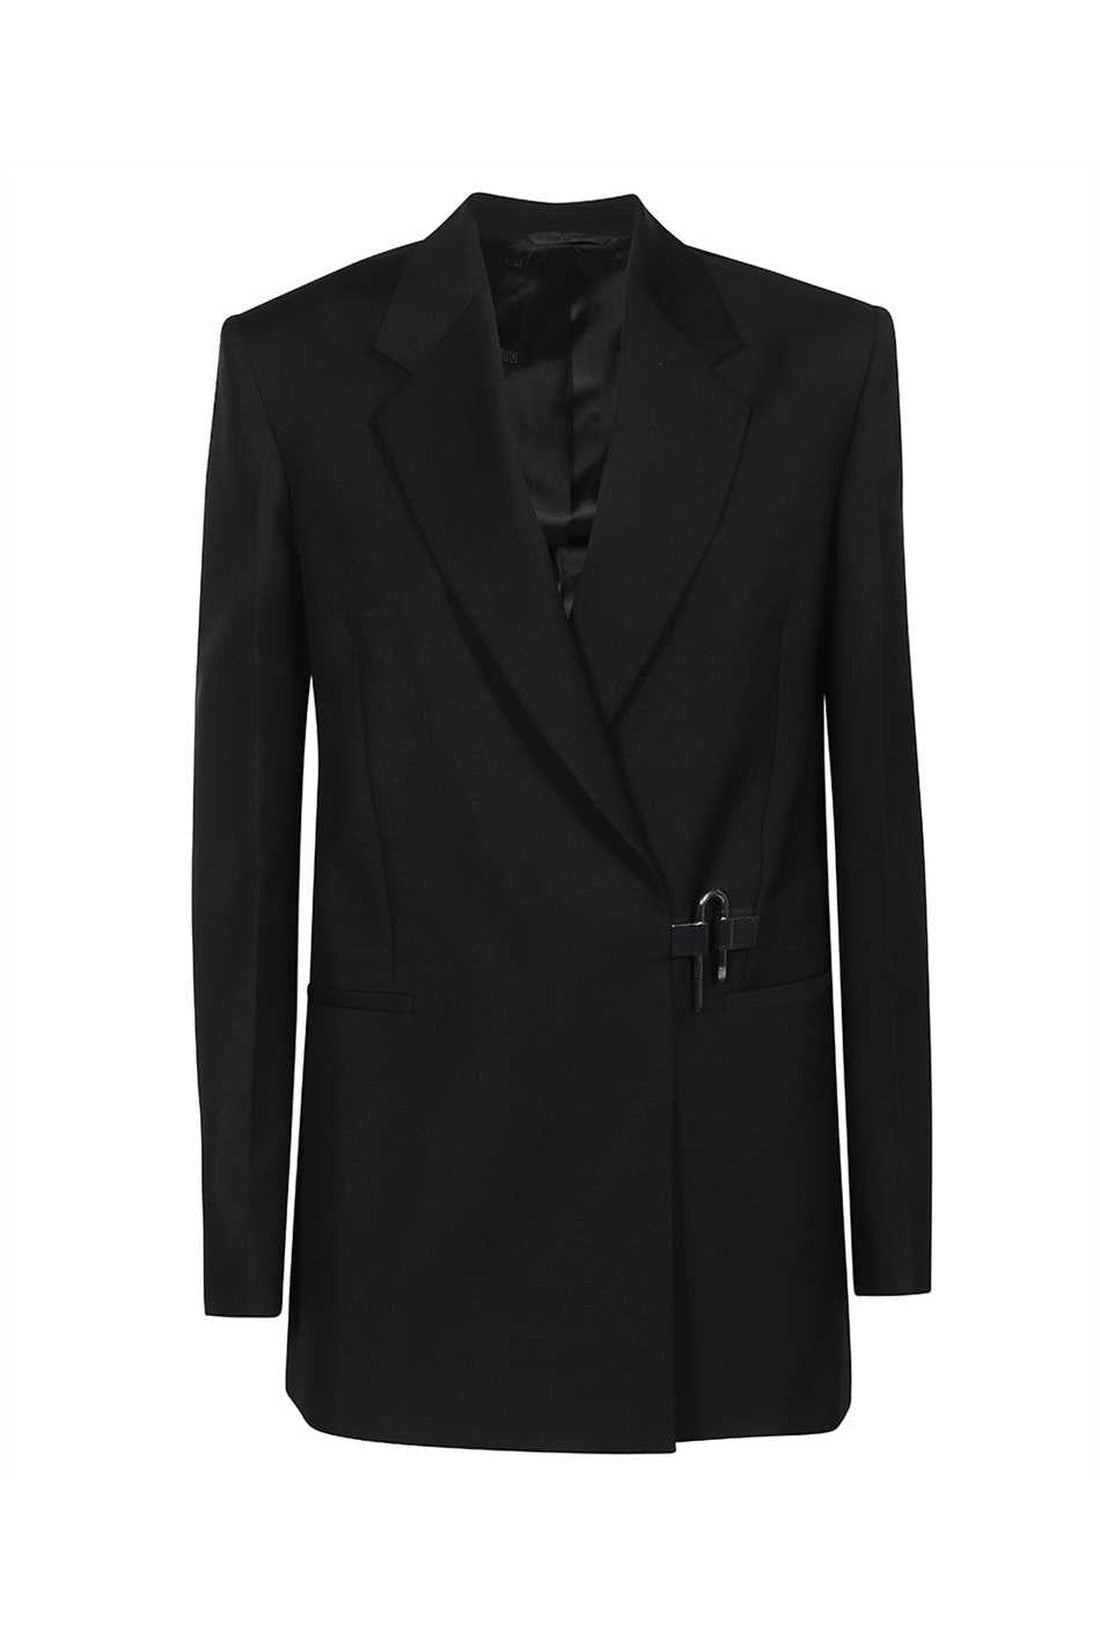 Wool blazer-Givenchy-OUTLET-SALE-34-ARCHIVIST